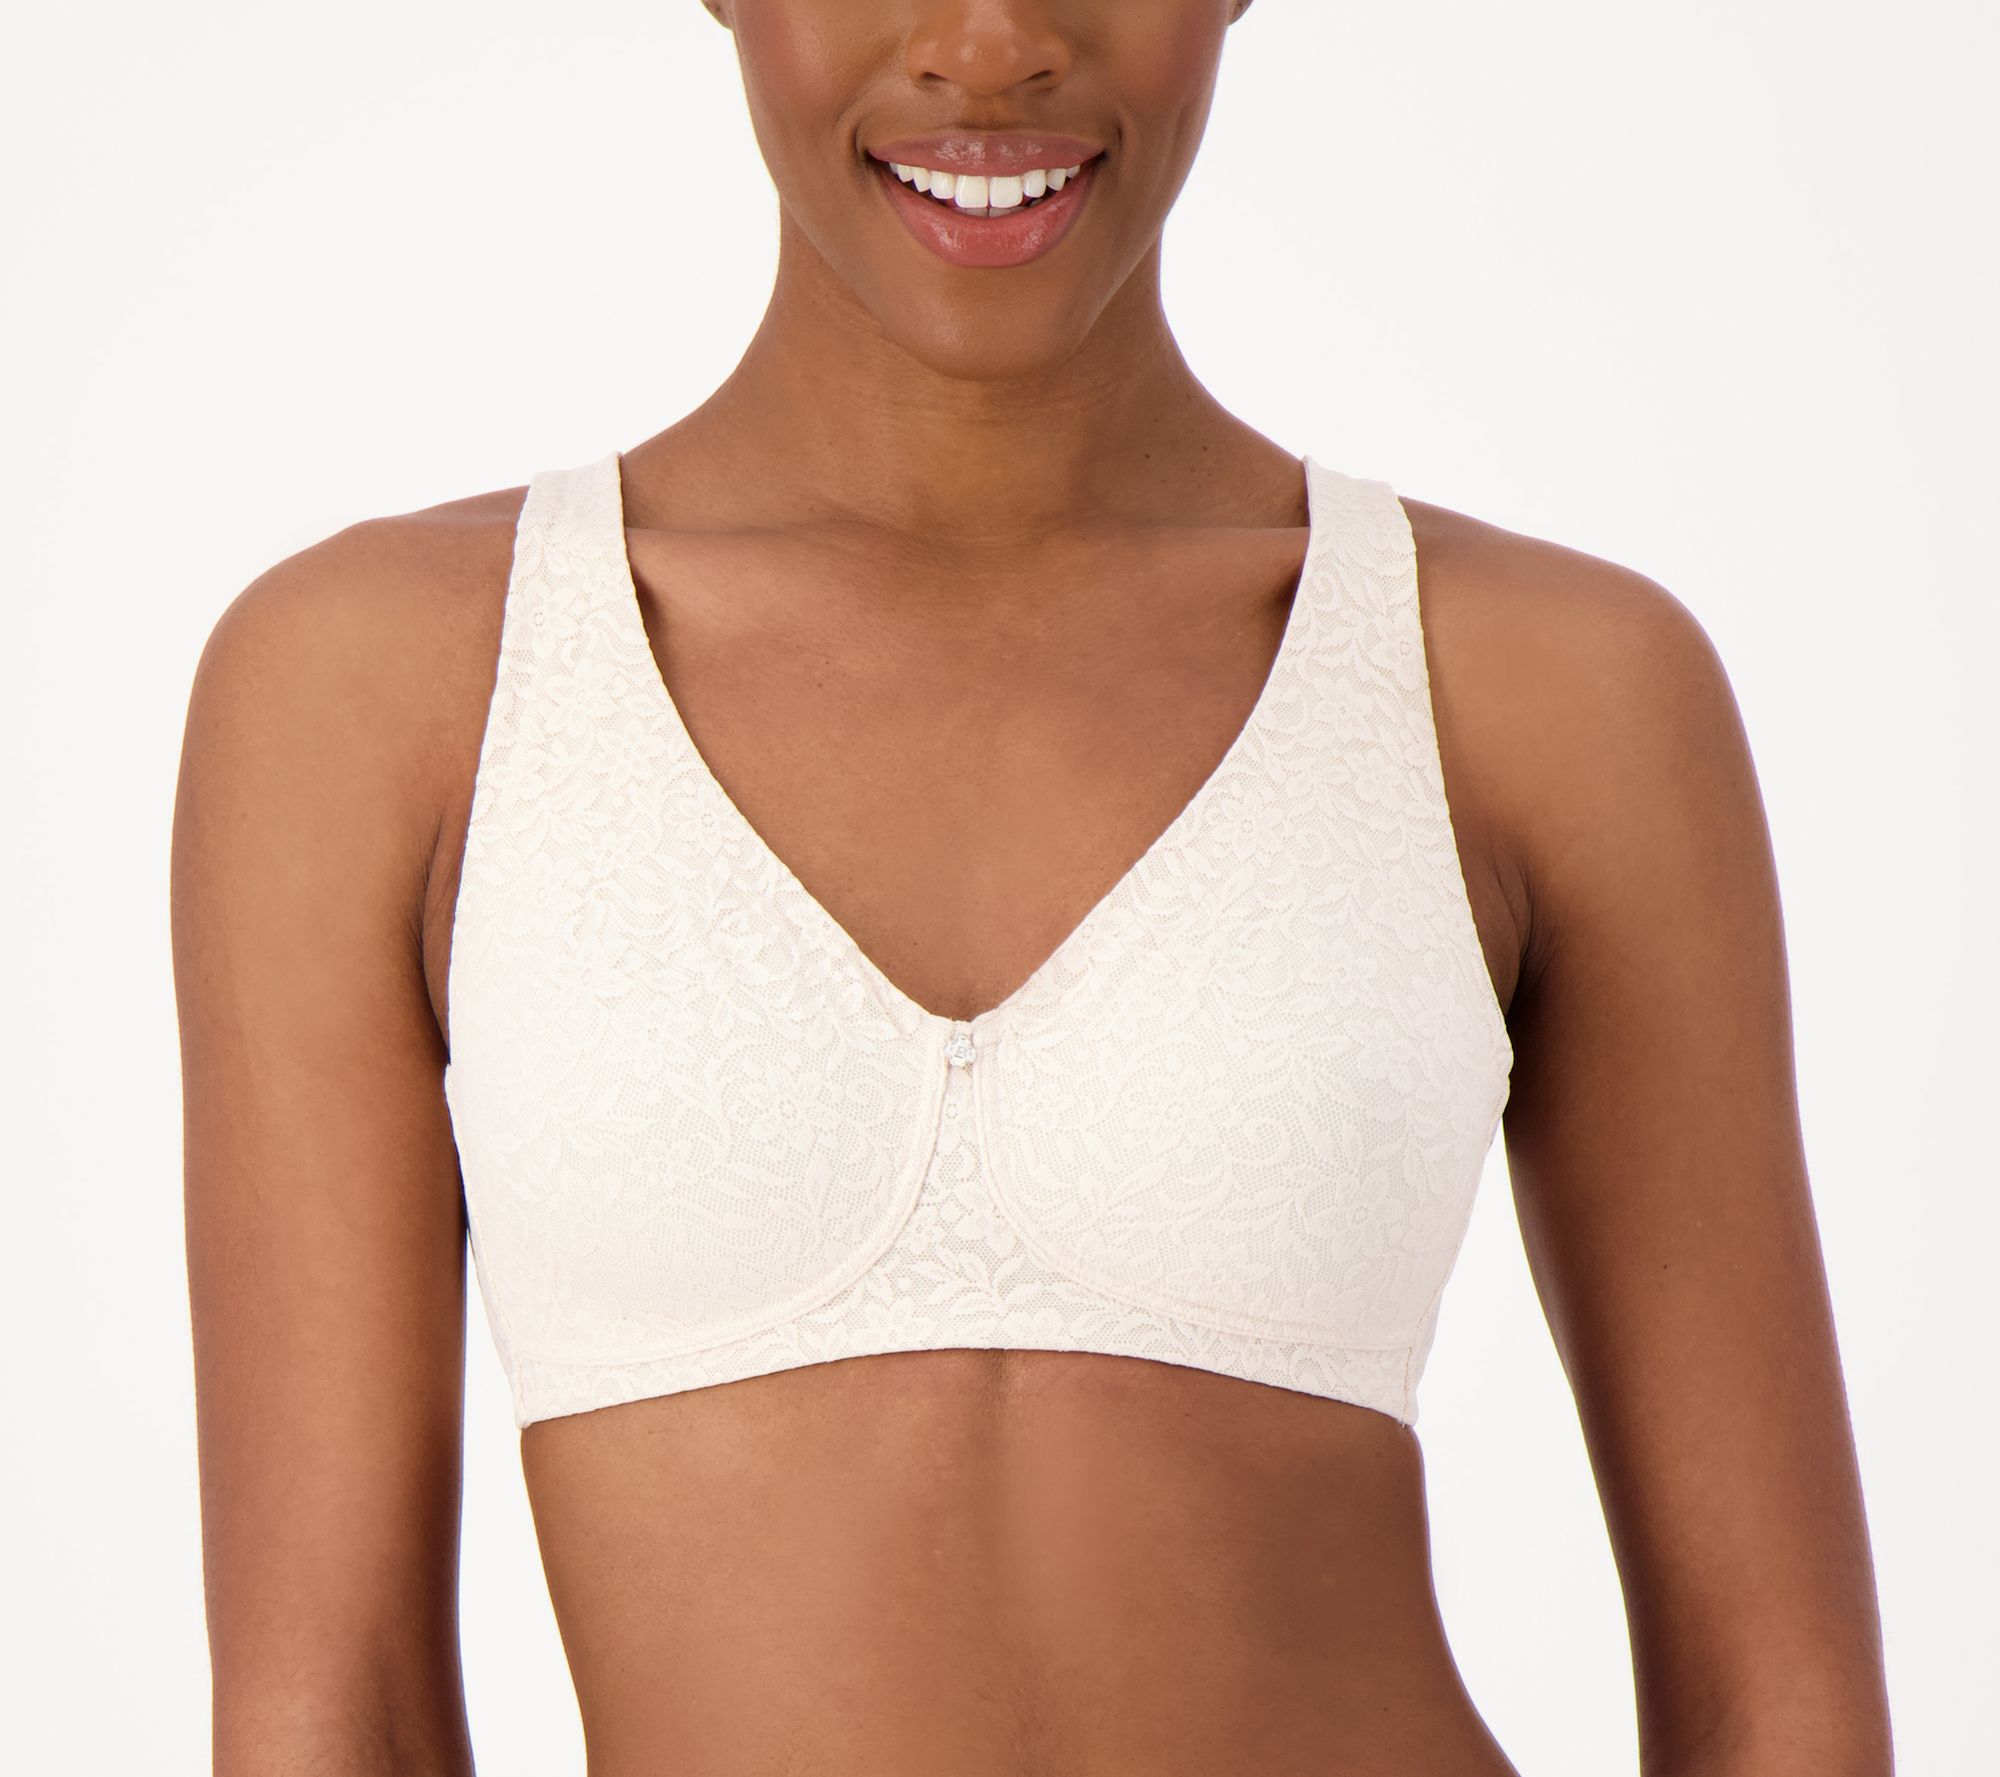 Buy Breezies Seamless Comfort Wirefree Bra White S # A346537 at